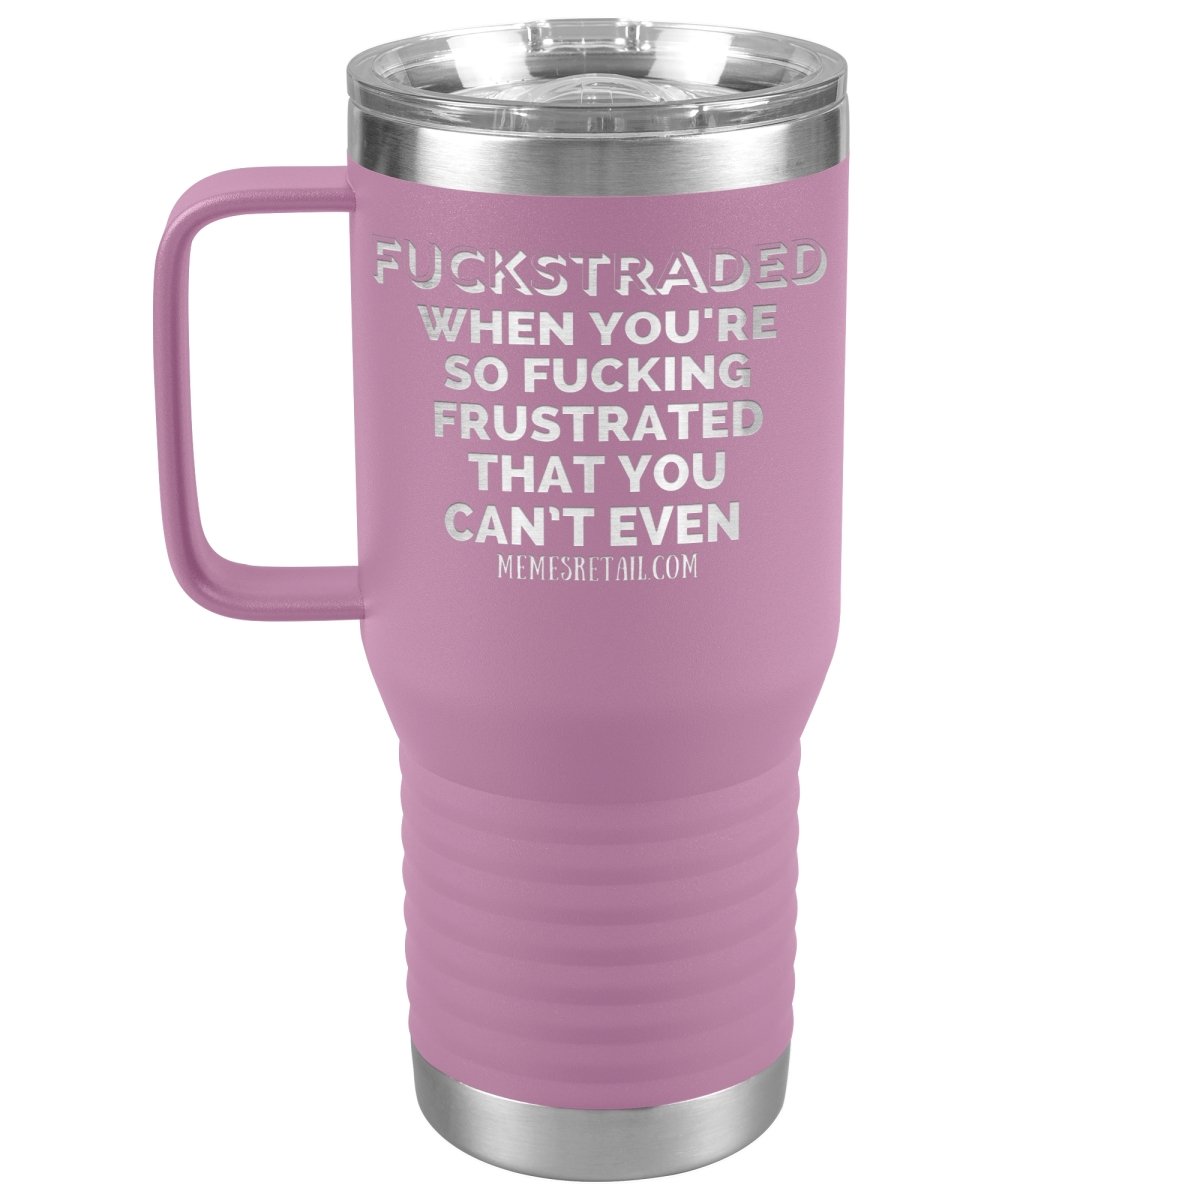 Fuckstraded, When You're So Fucking Frustrated That You Can’t Even Tumblers, 20oz Travel Tumbler / Light Purple - MemesRetail.com